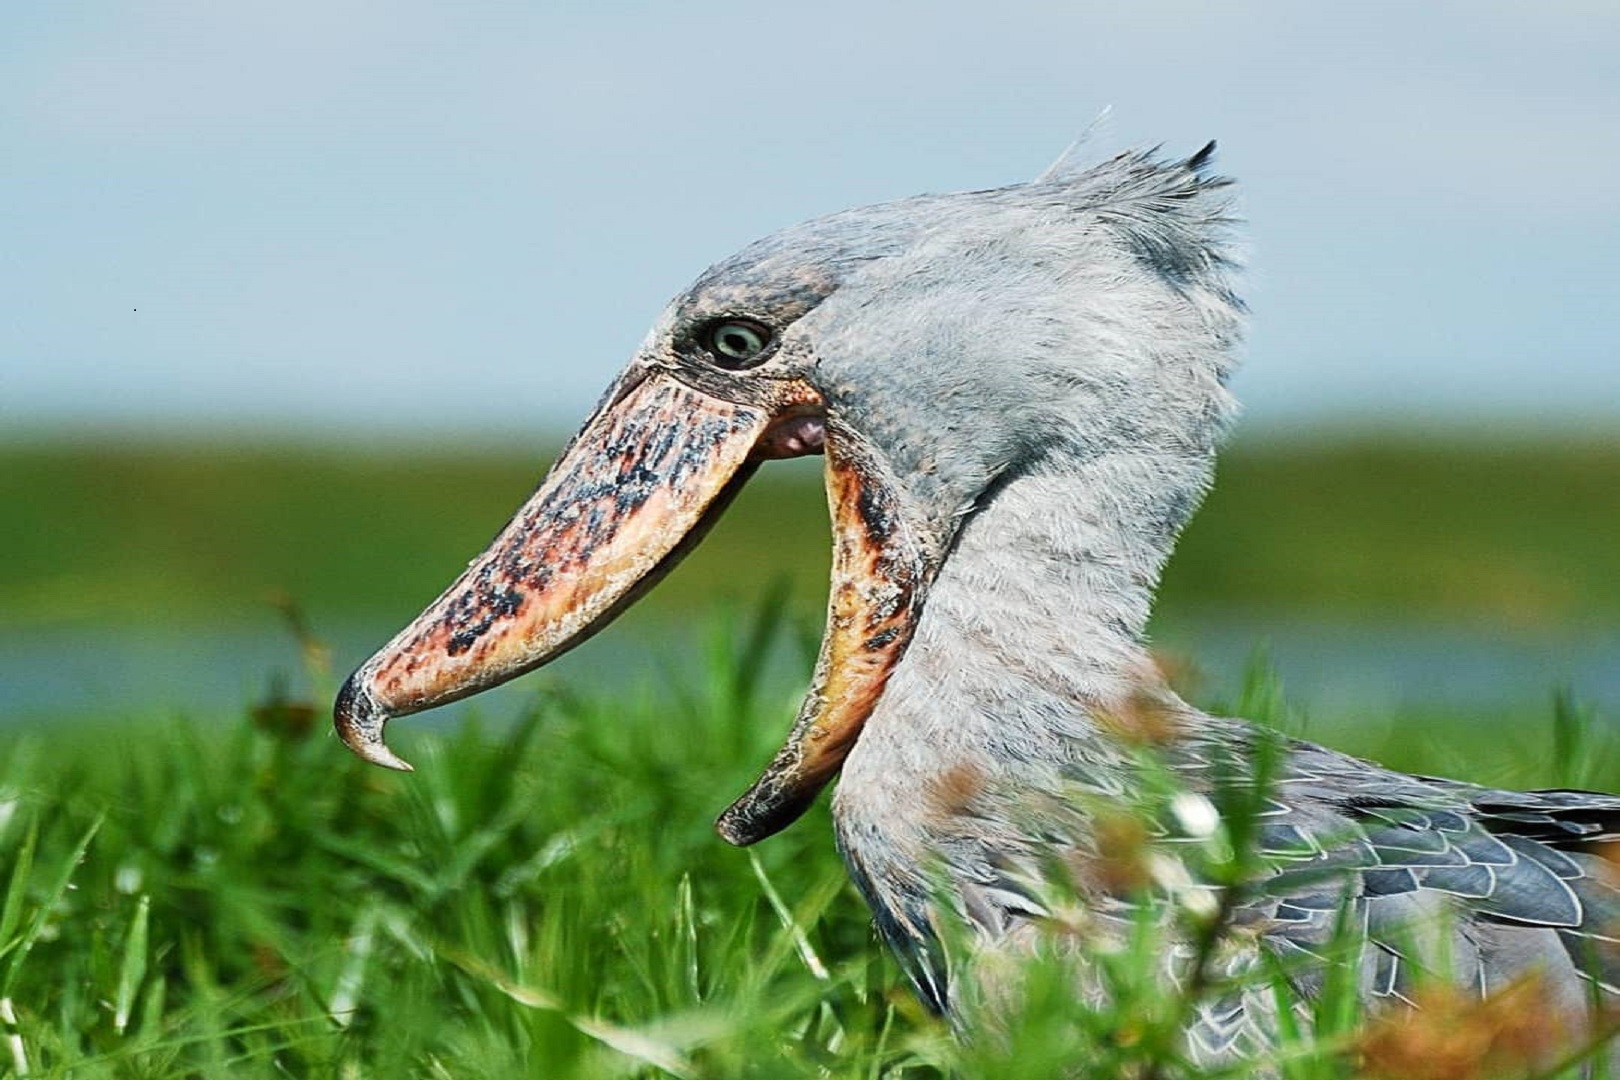 A shoebill stork is one of the birds to spot in Queen Elizabeth National Park